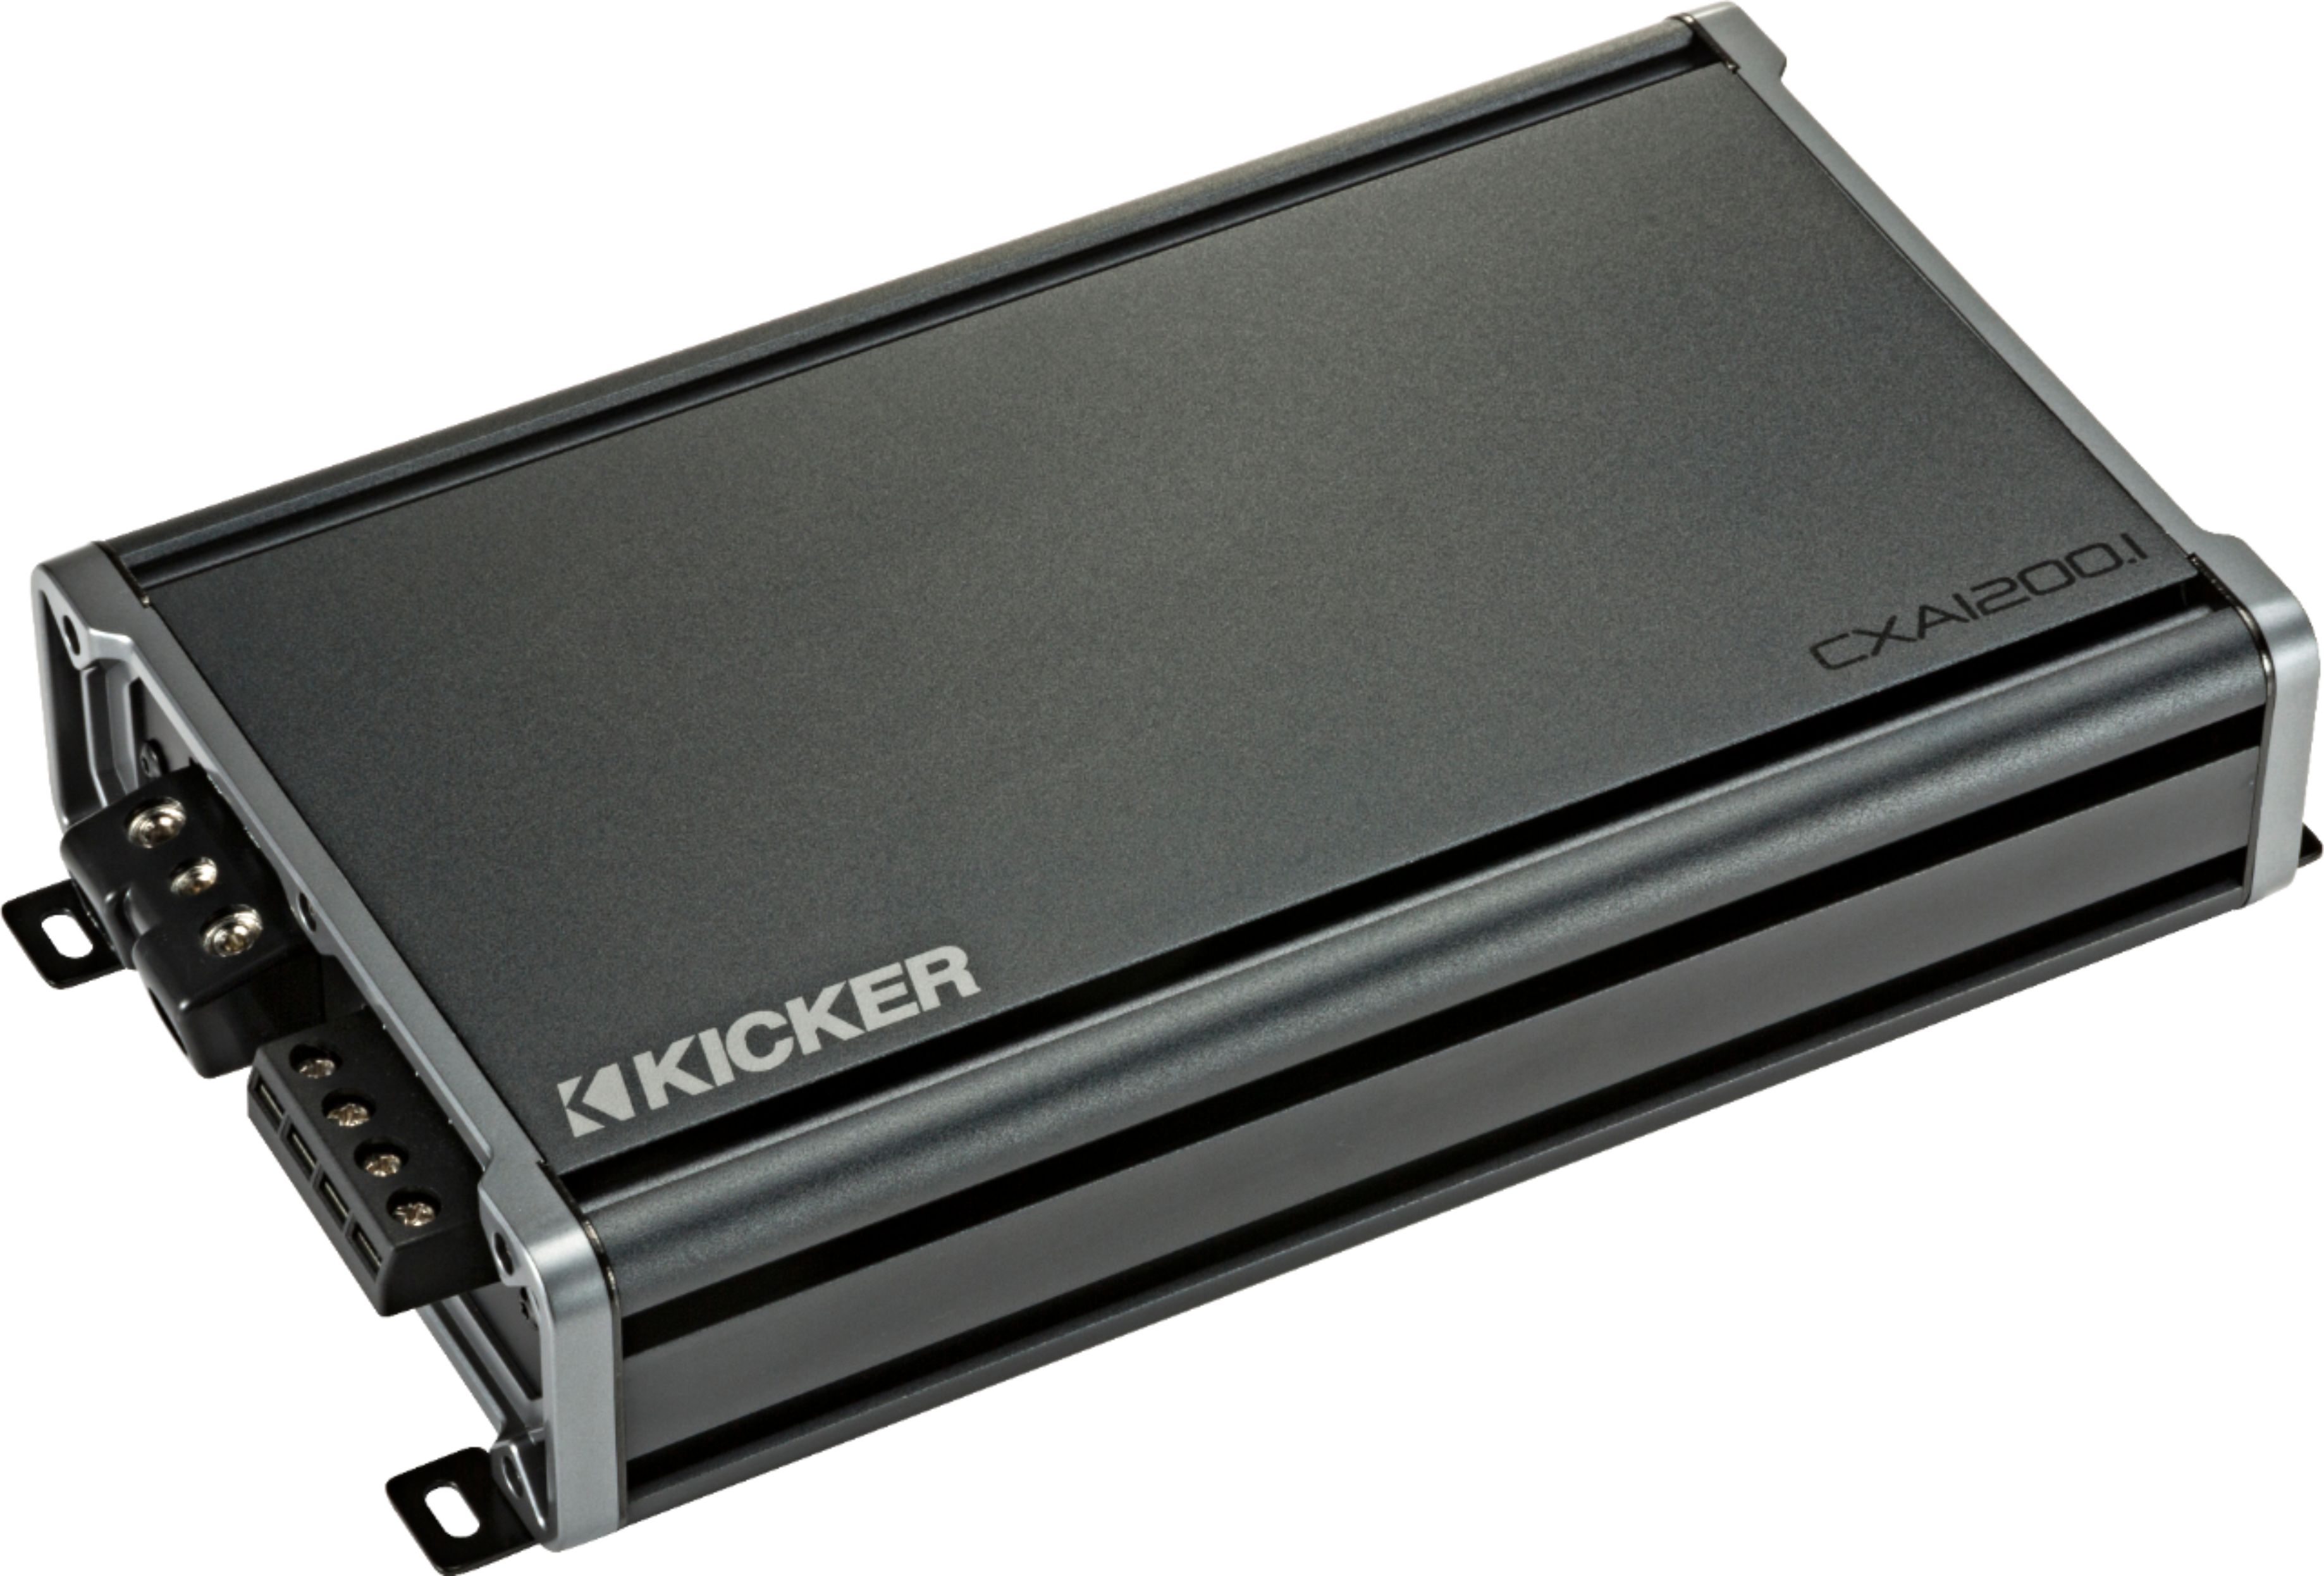 Angle View: KICKER - CX 1200W Class D Digital Mono Amplifier with Variable Low-Pass Crossover - Black